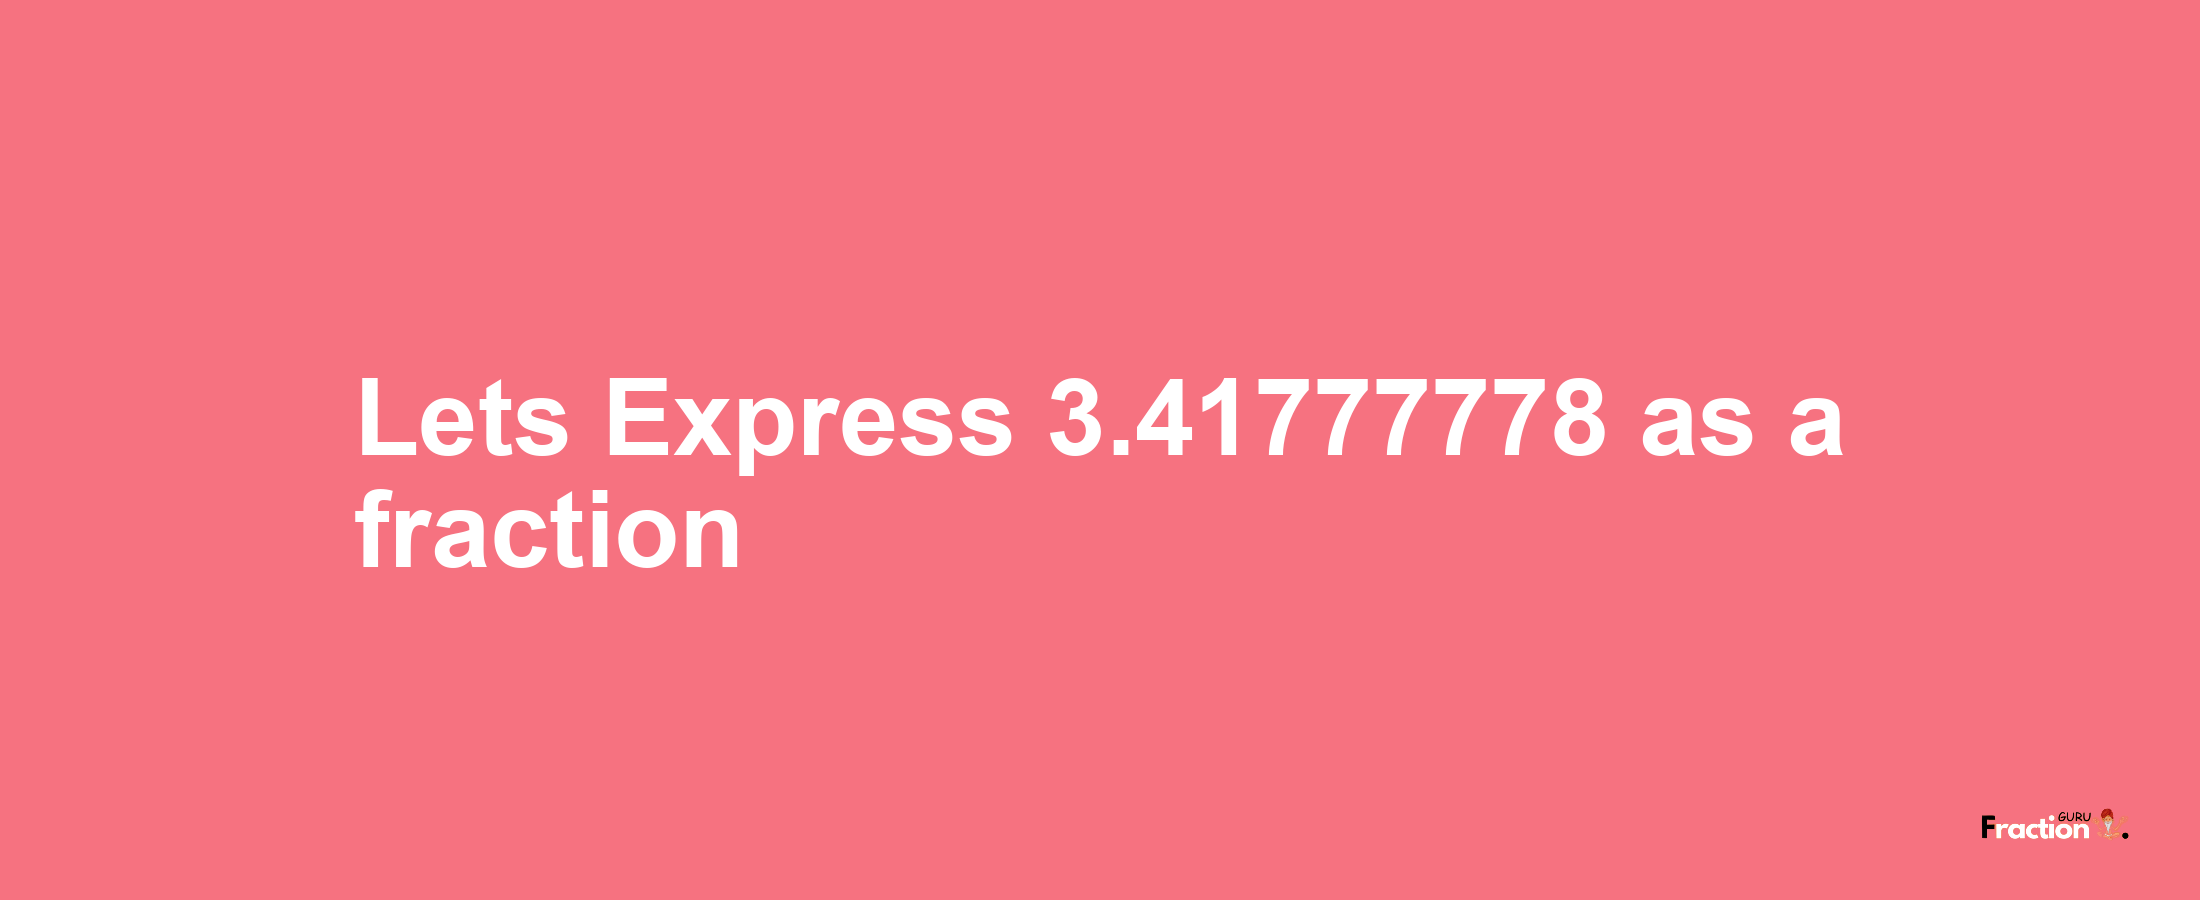 Lets Express 3.41777778 as afraction